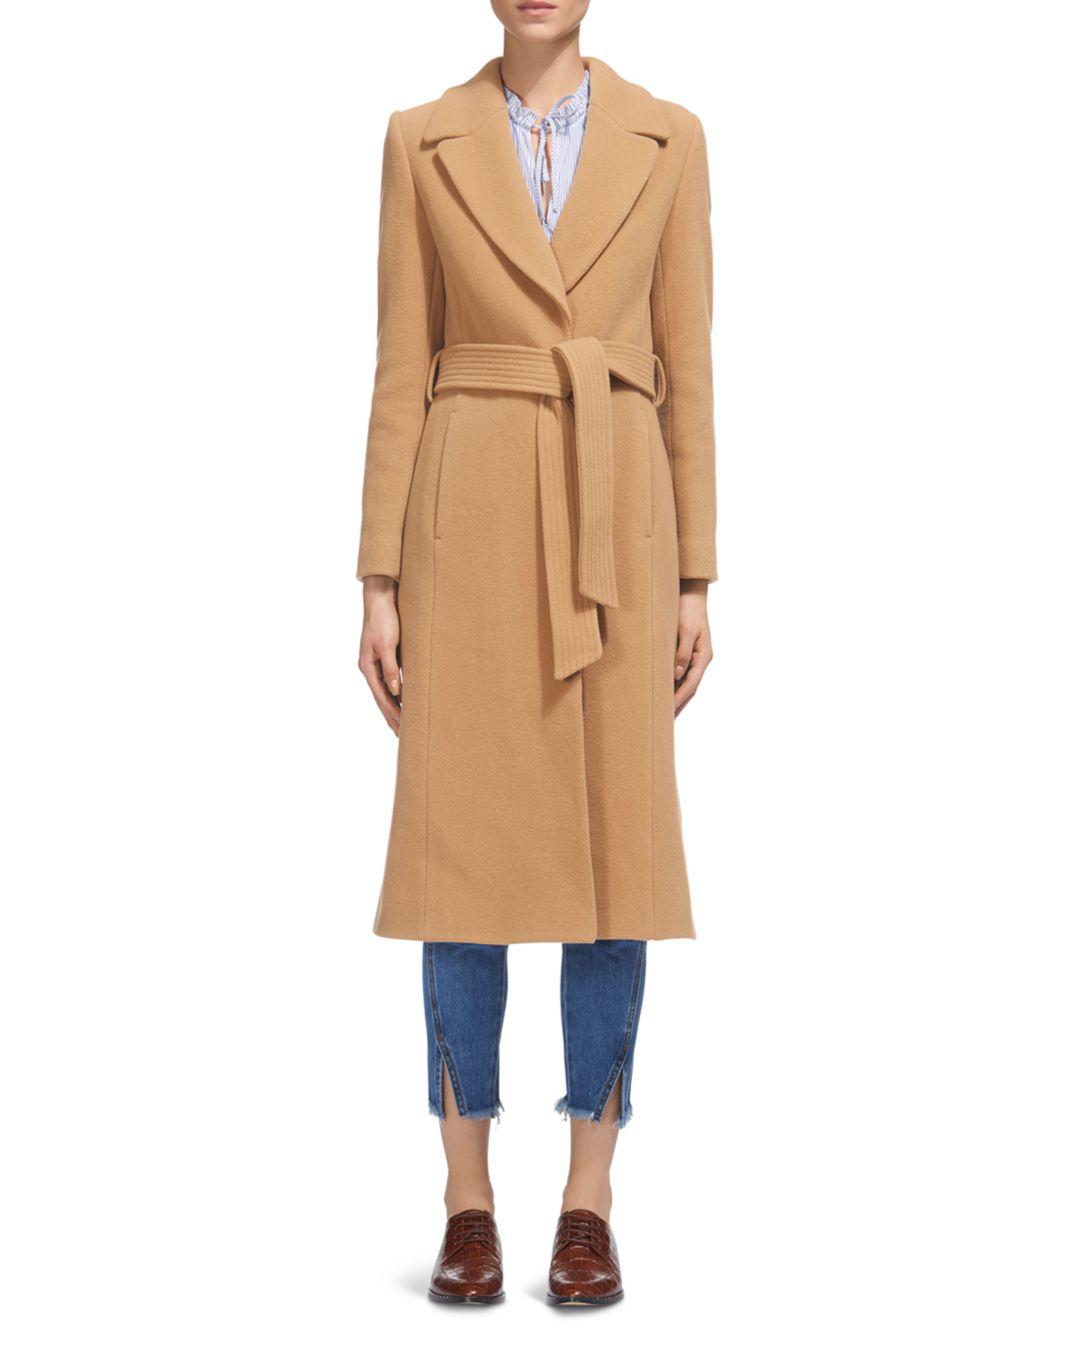 Whistles Alexandra Belted Camel Coat in Natural - Lyst